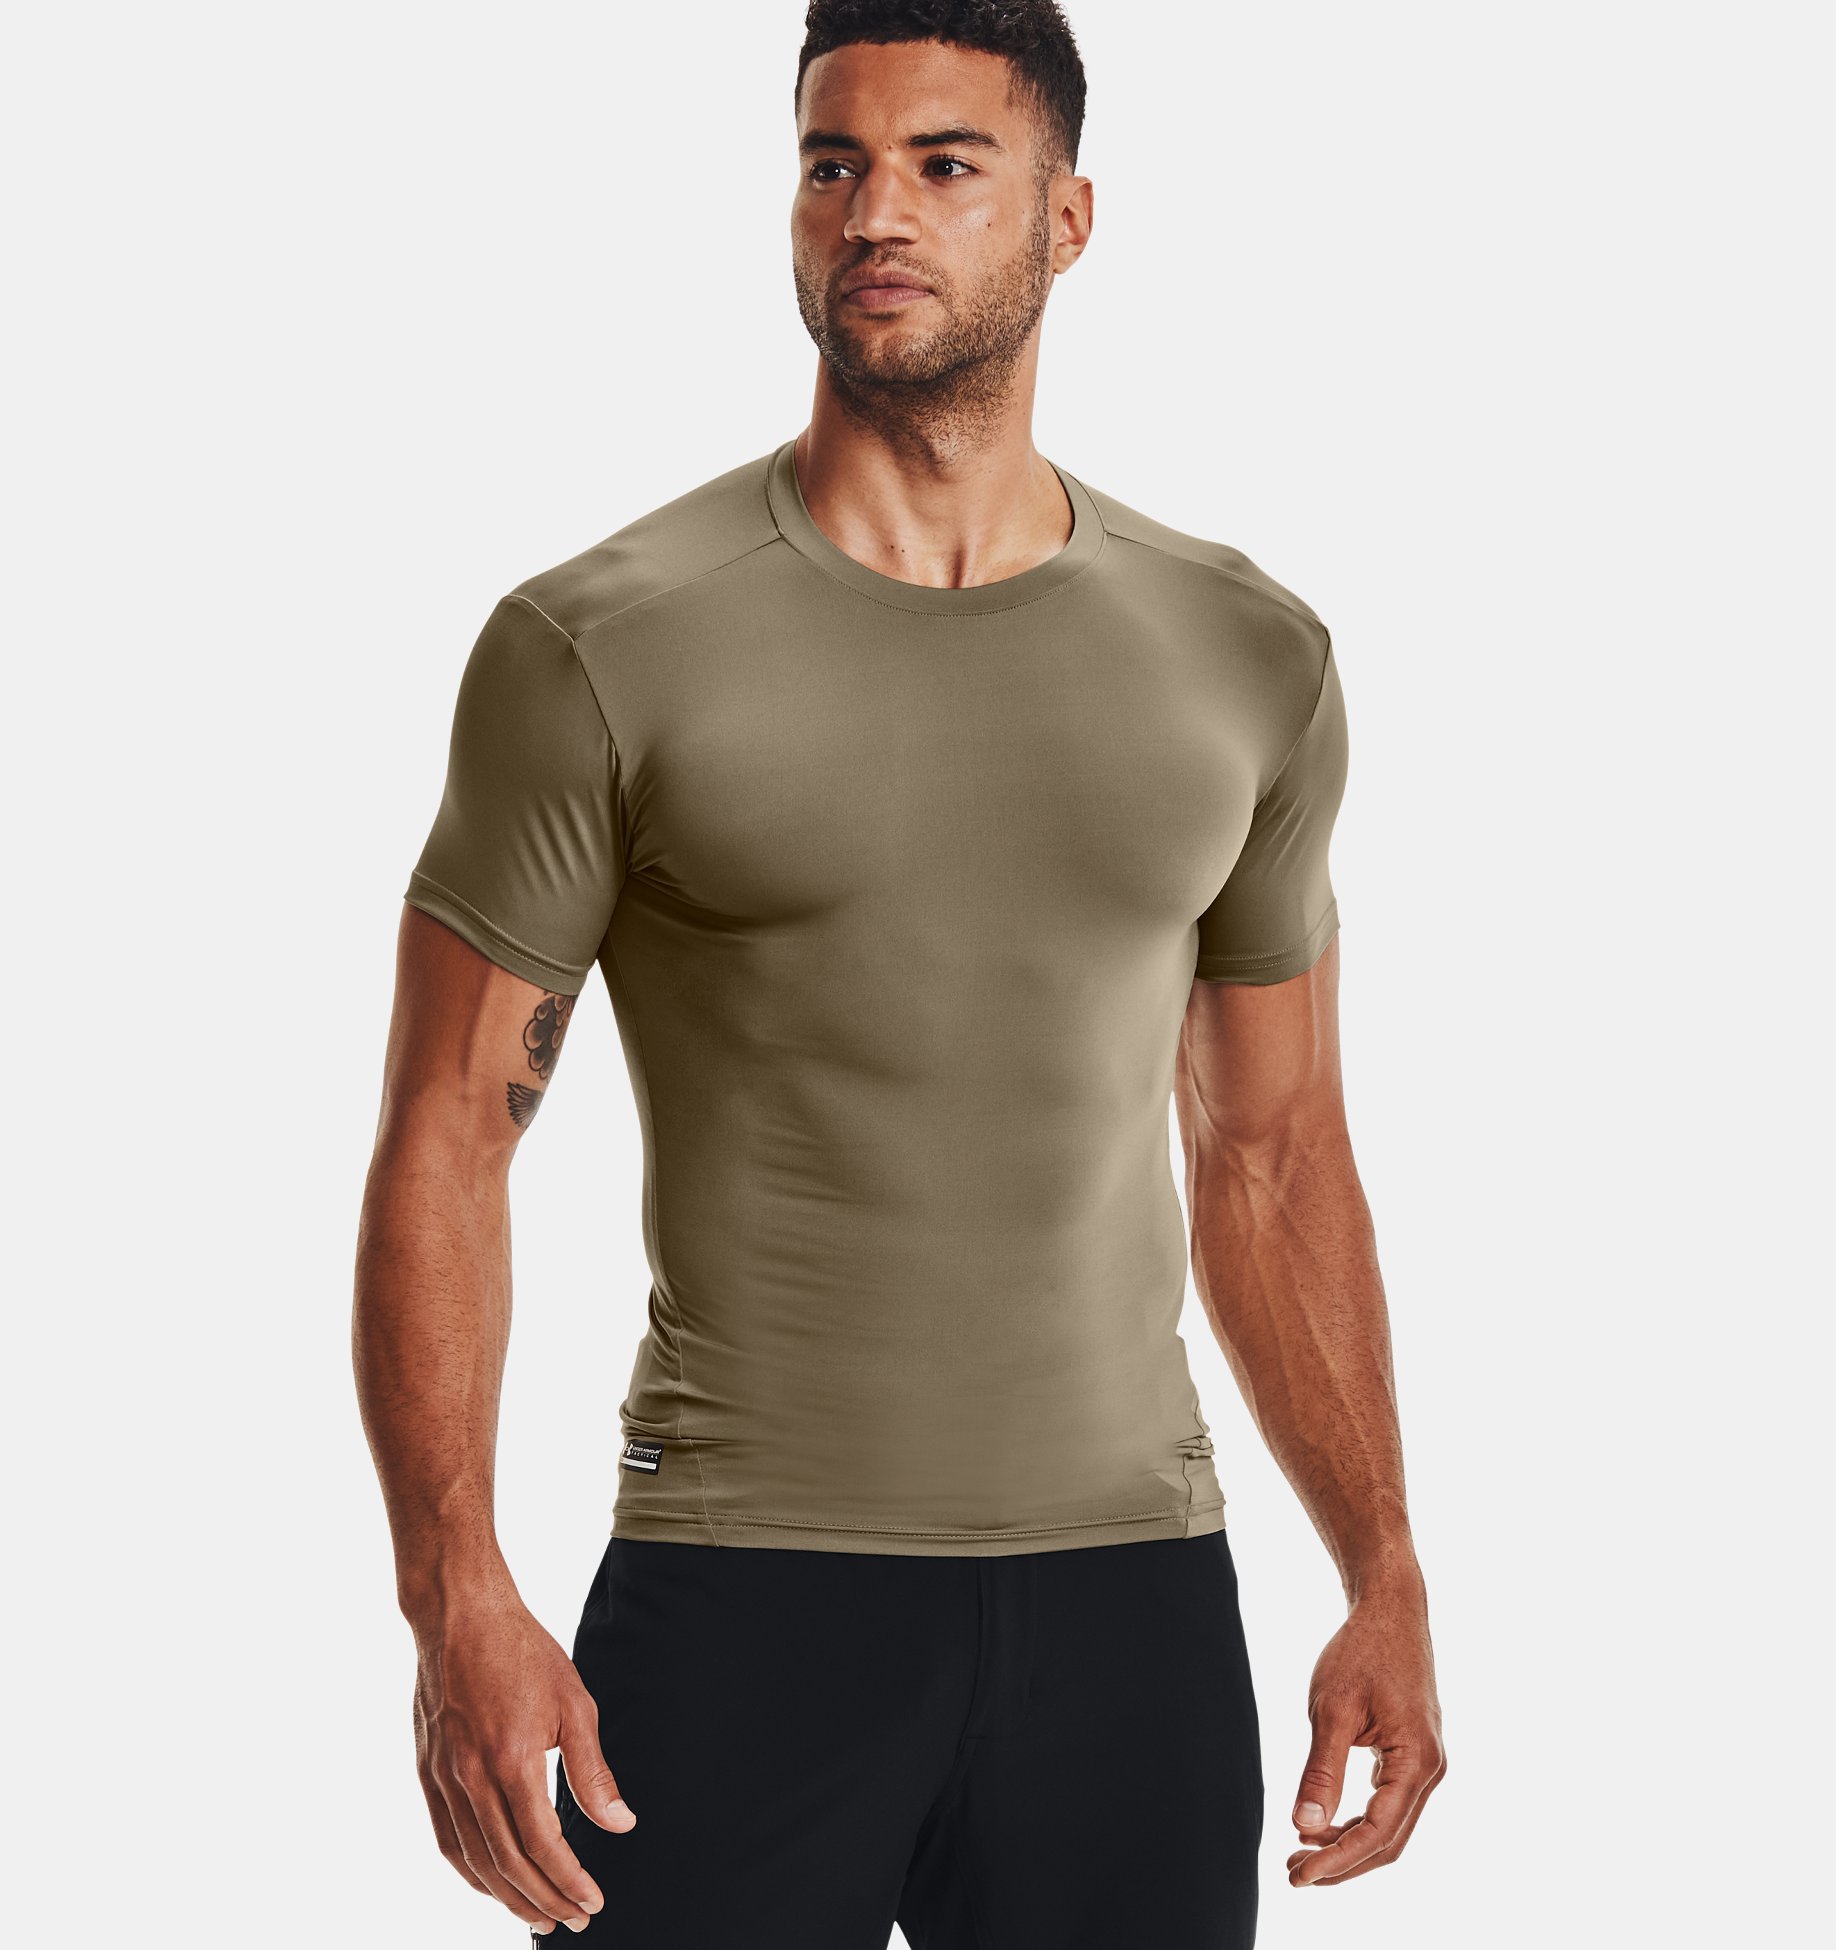 Under Armour compression top 